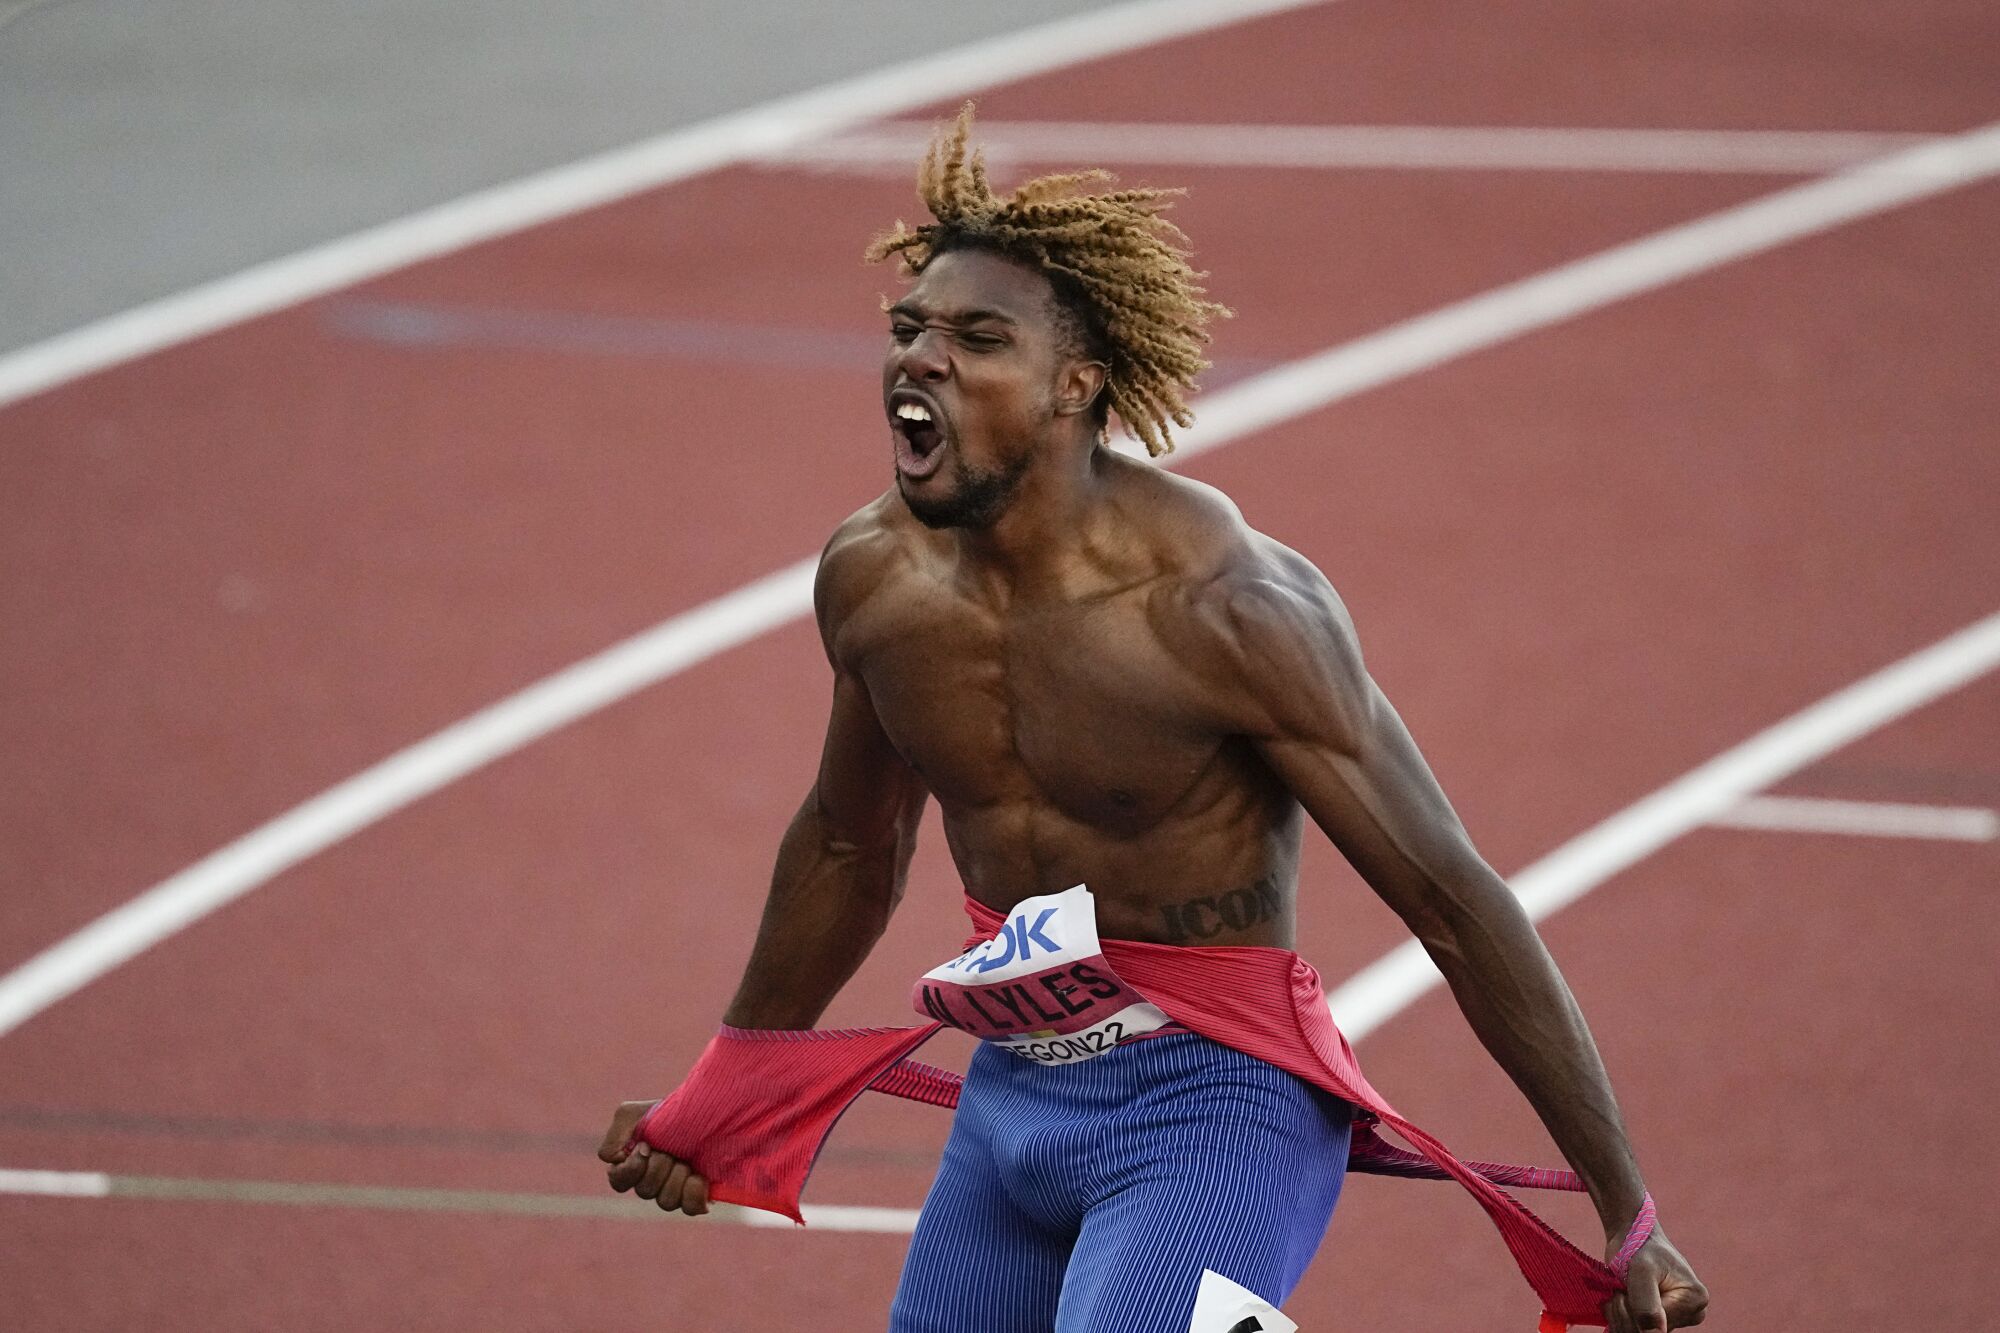 'I was freaking scared' How sprinter Noah Lyles shook off doubt Los